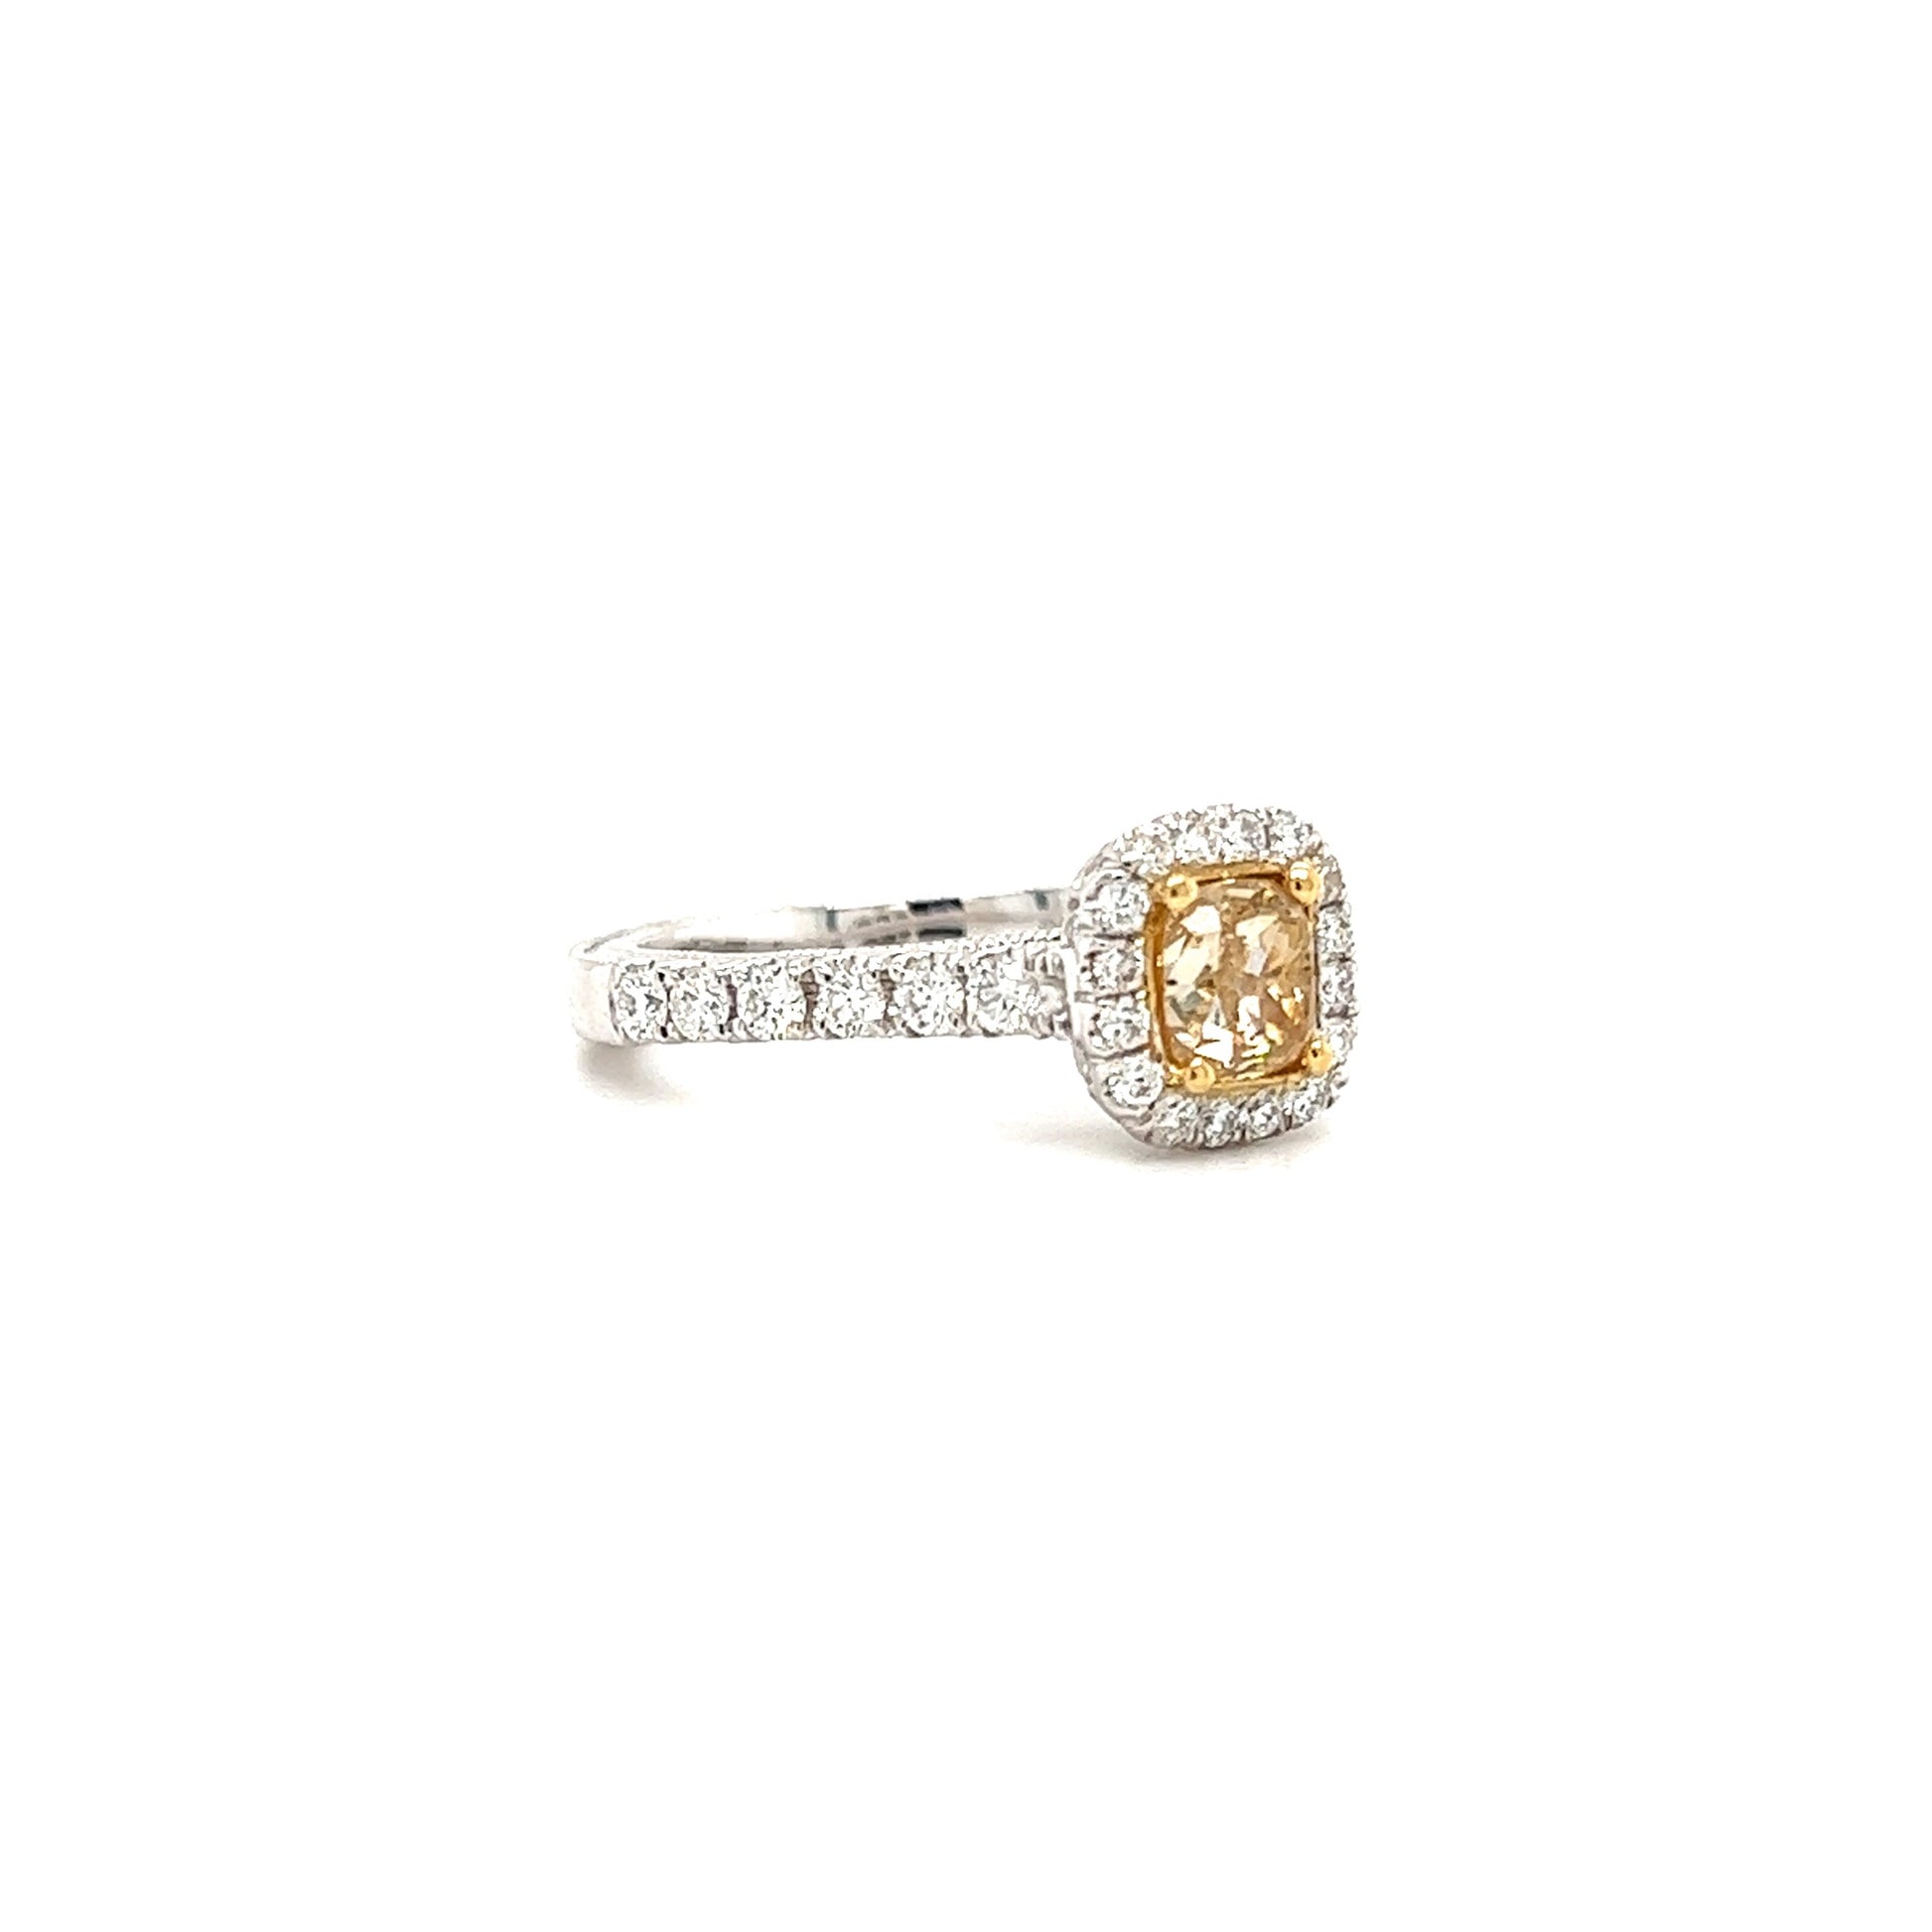 Yellow Diamond Ring with Forty-Two Diamonds in 18K White Gold Right Side View